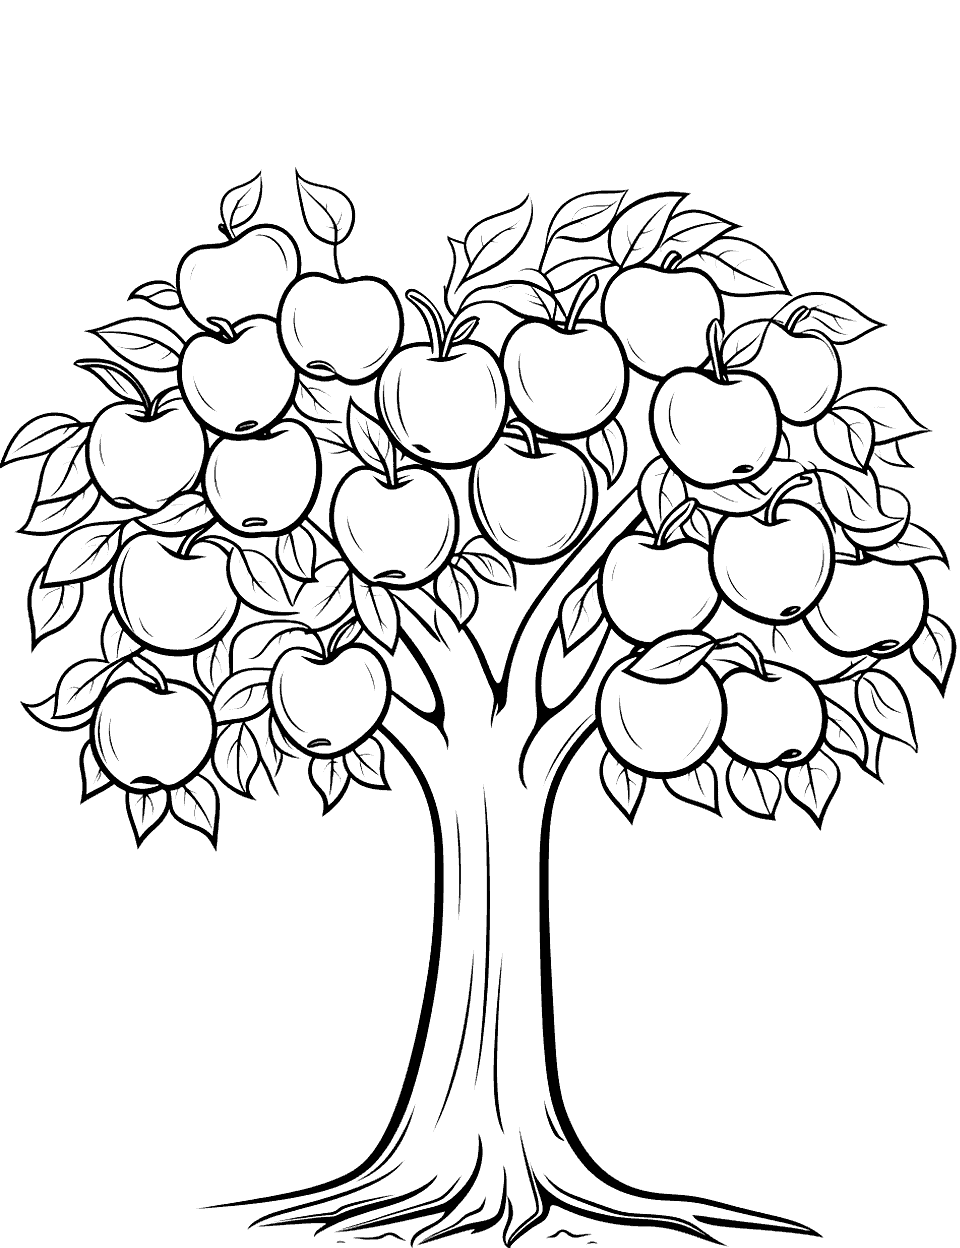 Apple Tree in Fall Coloring Page - An apple tree in fall with leaves of different colors and apples ready for harvest.